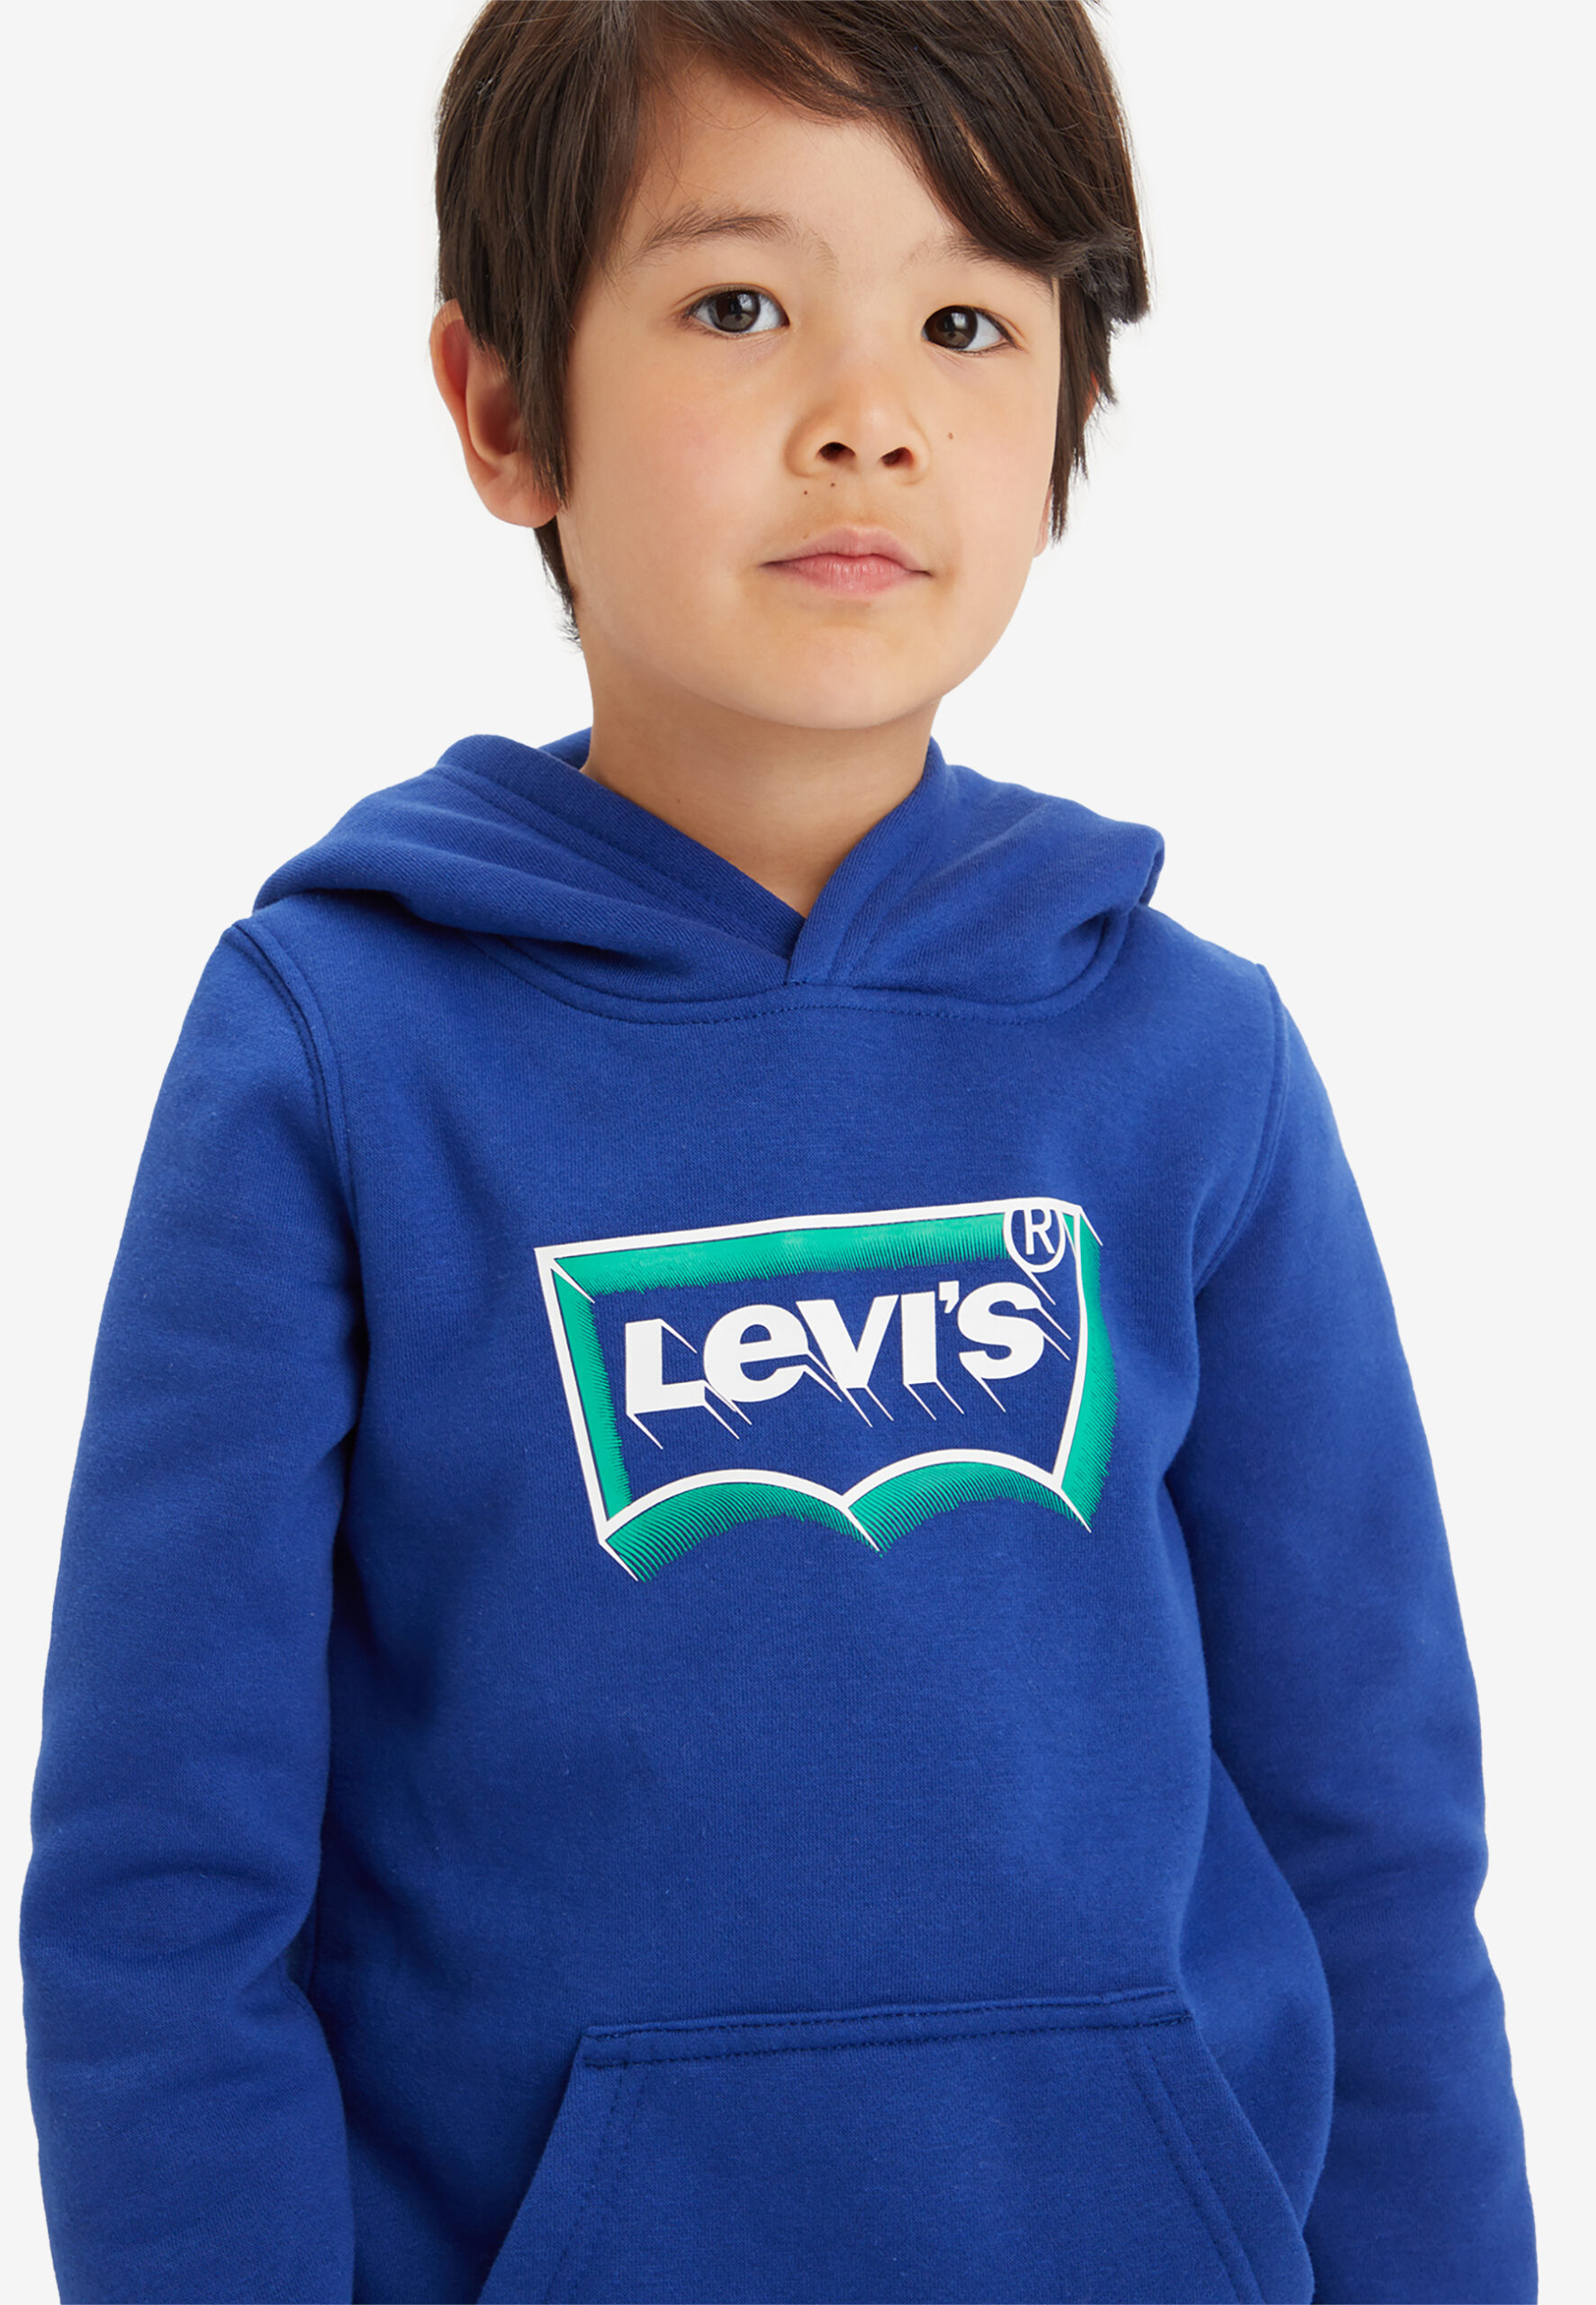 Levis Blue and Green Hoody